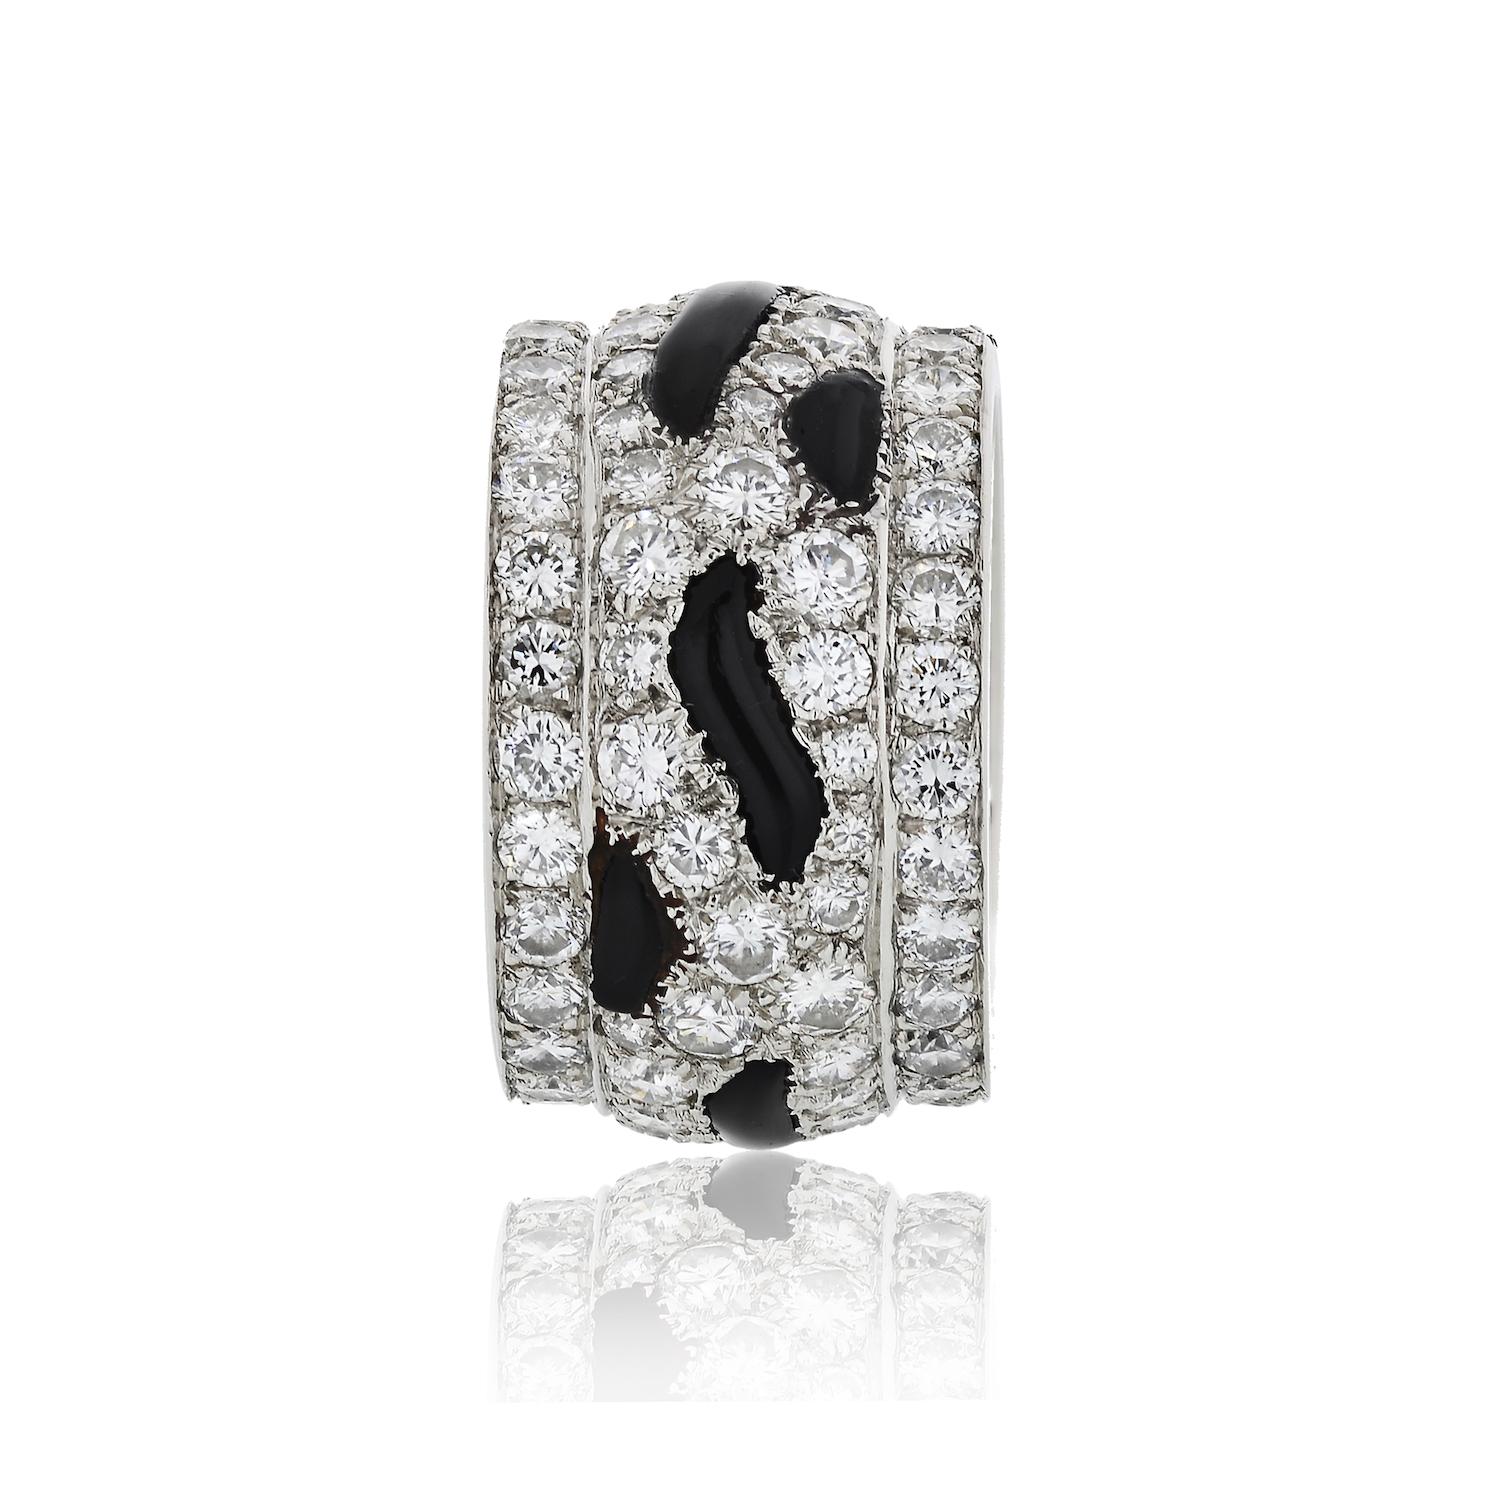 A vintage Cartier diamond band ring in platinum, set with round-cut diamonds and onyx from Cartier's Nigeria collection.
Ring Width: 12.5mm
Ring Size: 5 
Carat Weight: 4.50cts.